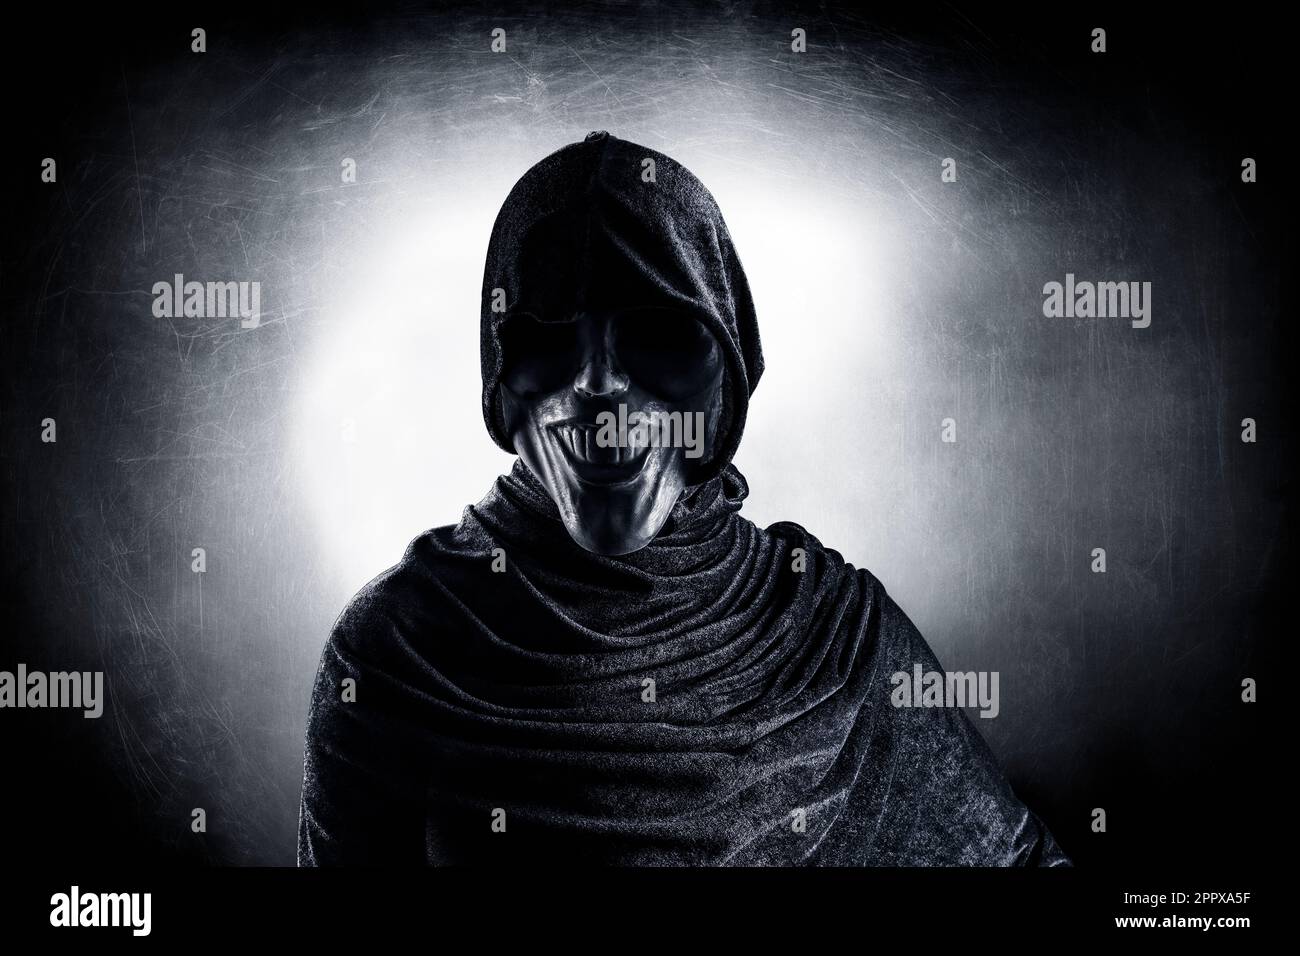 Scary figure with hooded cloak in the dark Stock Photo - Alamy